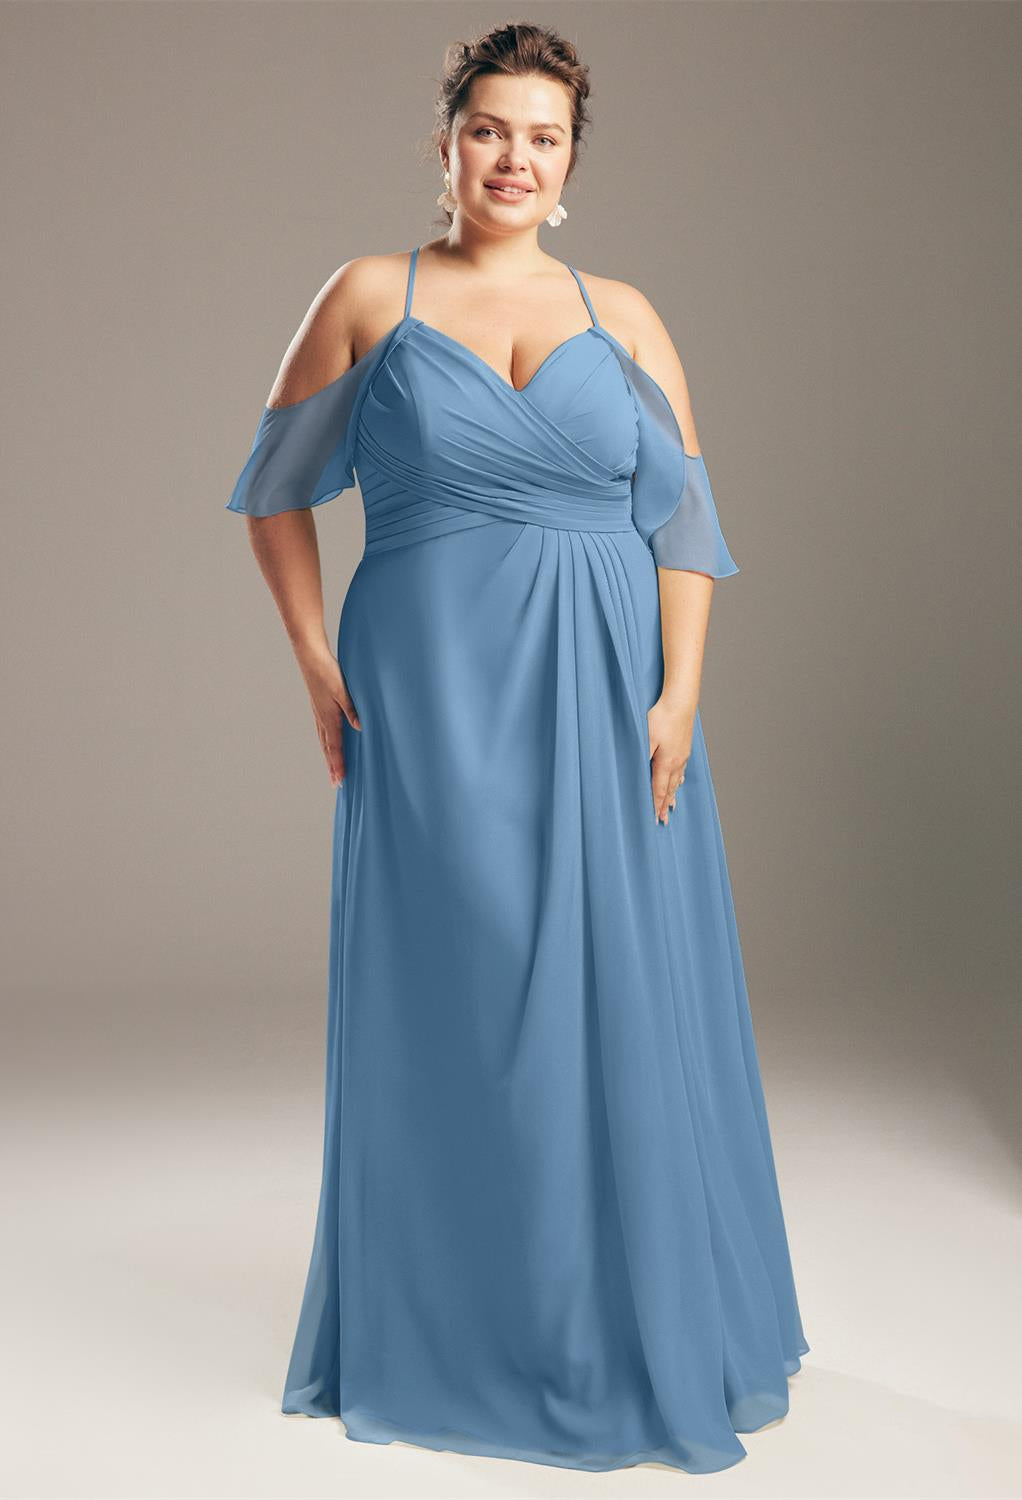 A plus size bridesmaid in a blue dress looking for the Jenifer - Chiffon Bridesmaid Dress - Off the Rack from Bergamot Bridal in London.